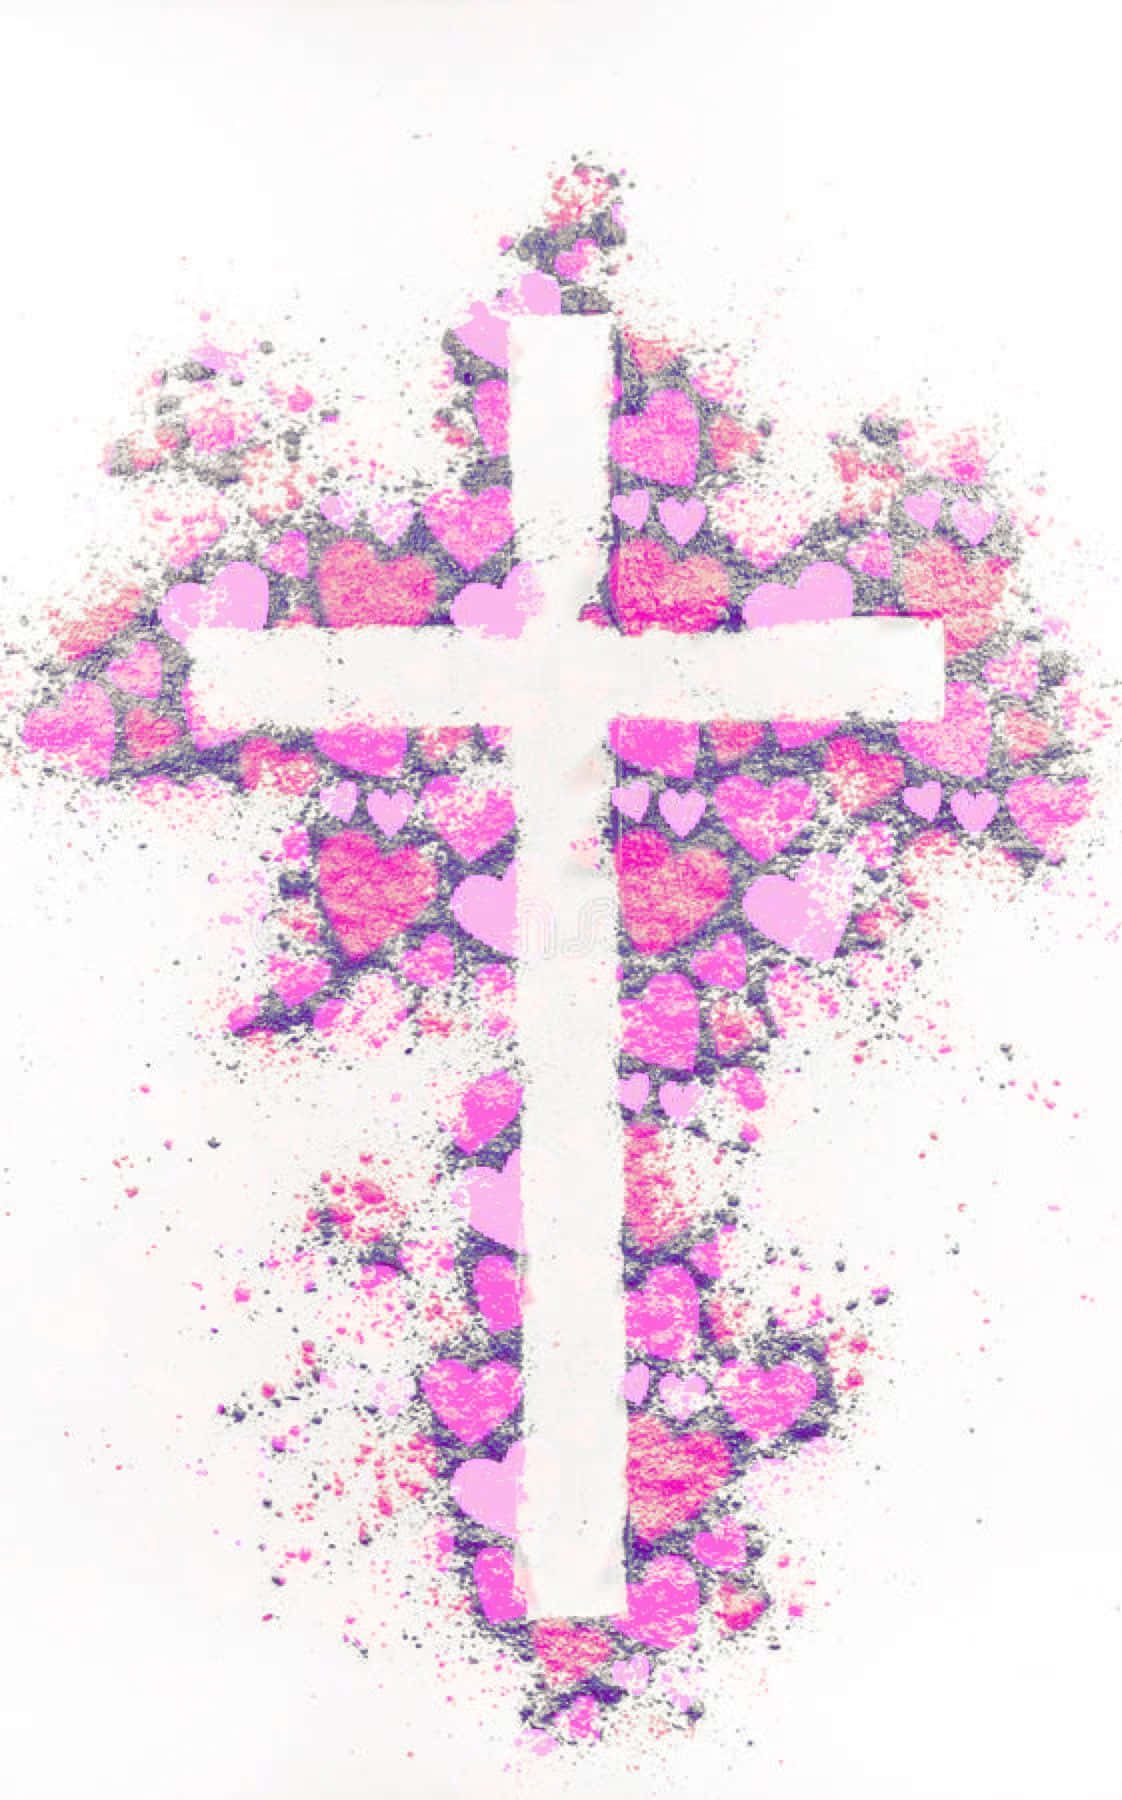 A pink cross symbolizing peace and tranquility Wallpaper